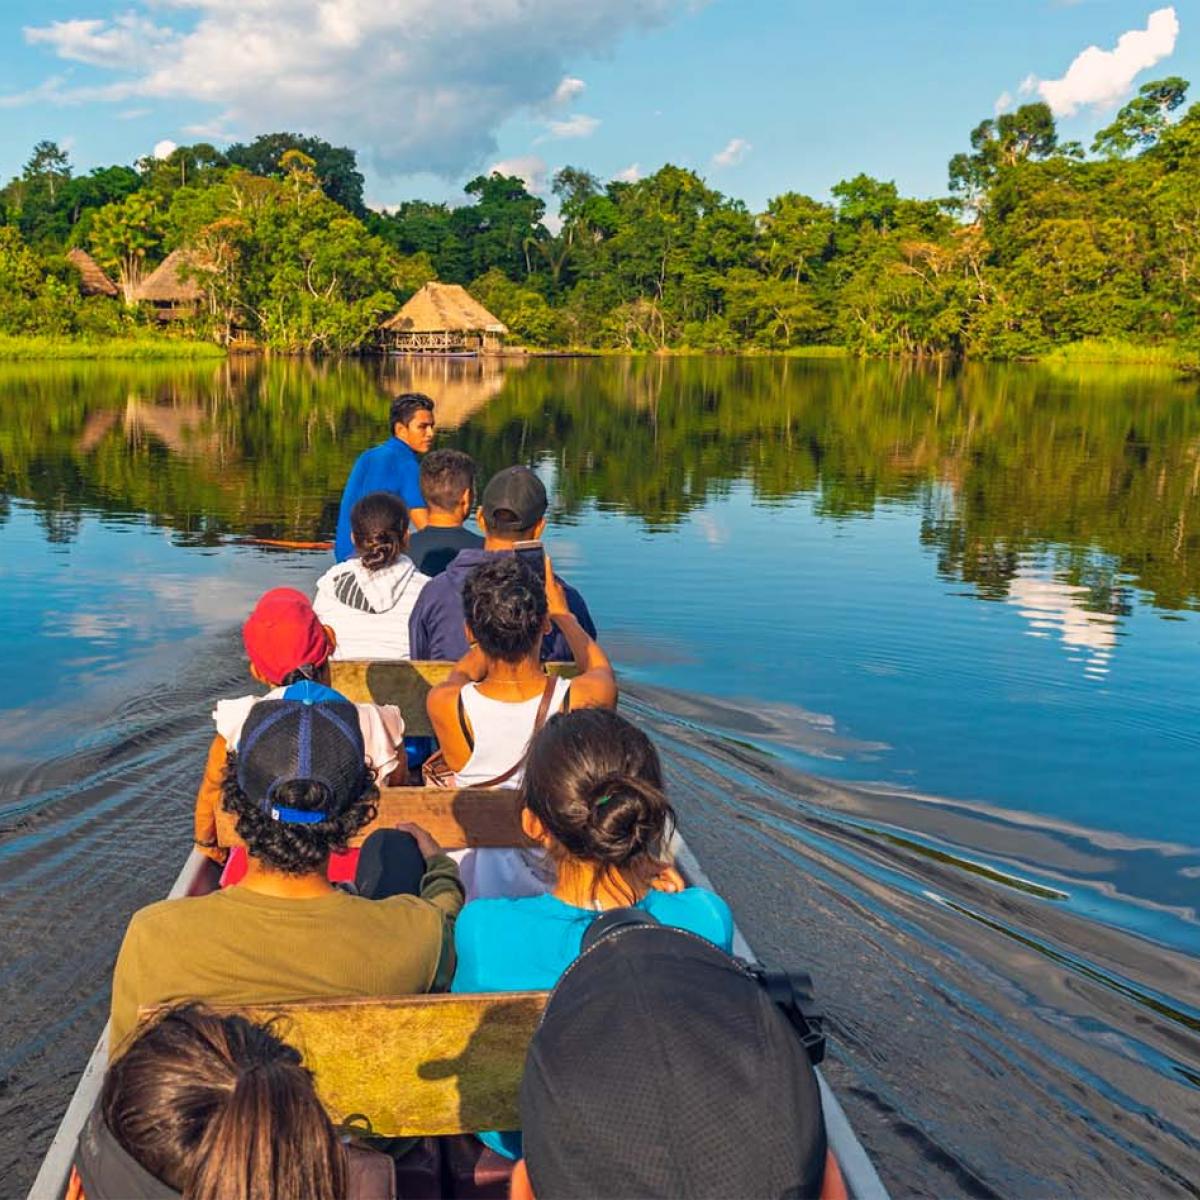 A group of people on a boat on an amazonian river